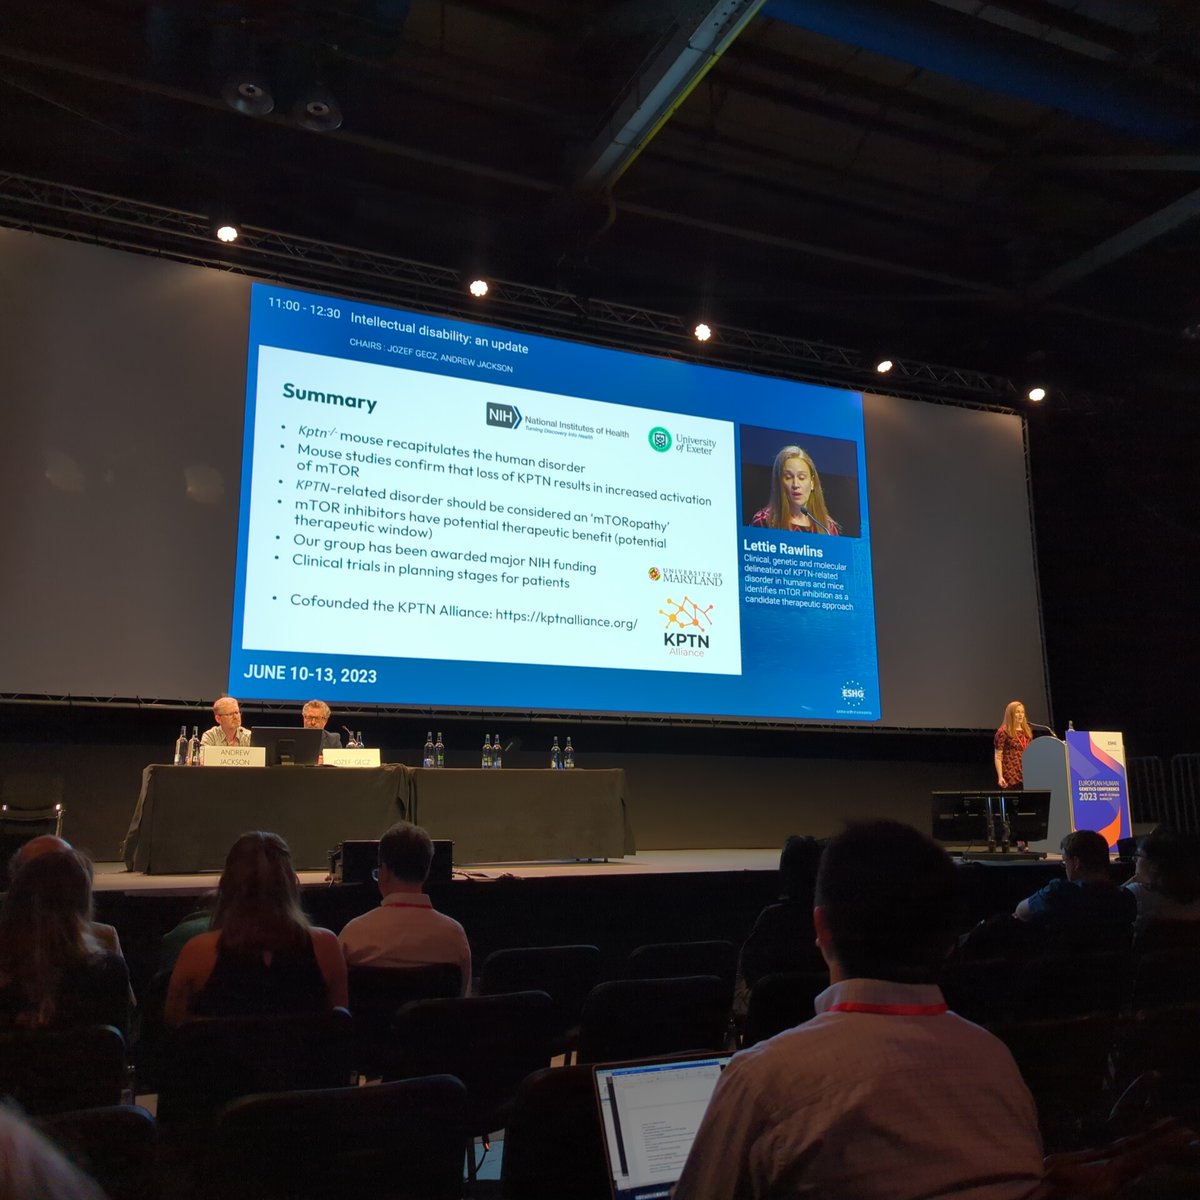 Lettie Rawlins in Hall 5 #ESHG2023 KPTN-related disorder is an AR mTORopathy with ID, macrocephaly +/- seizures Treatment with MTOR inhibitors have potential benefit with a window in Major @NIH funding with @UofMaryland to explore